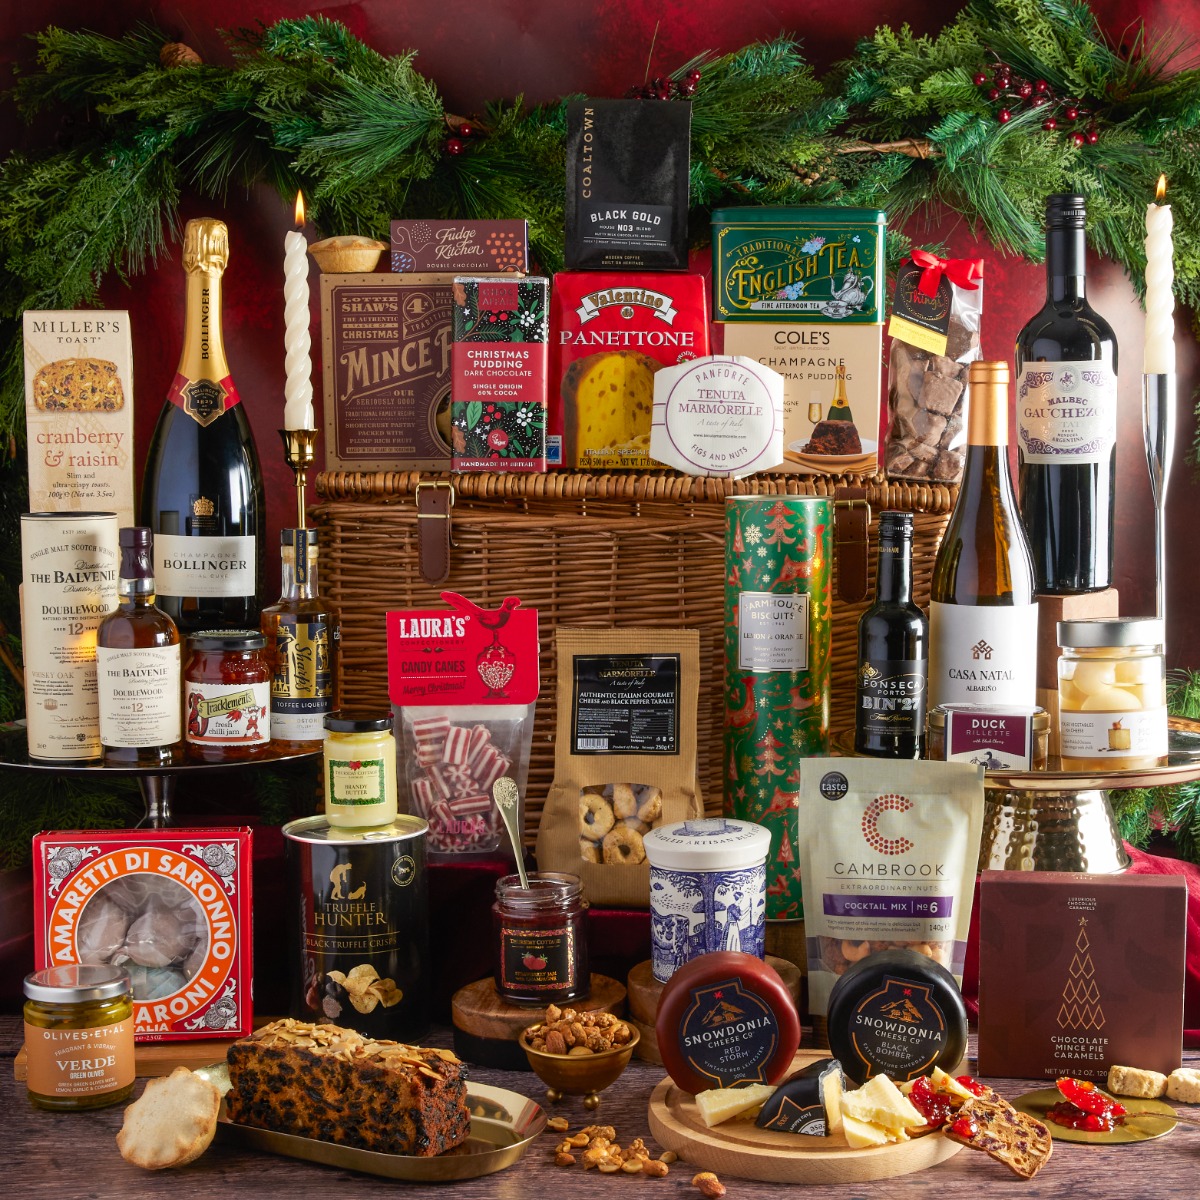 The Magnificent Christmas Hamper with contents on display